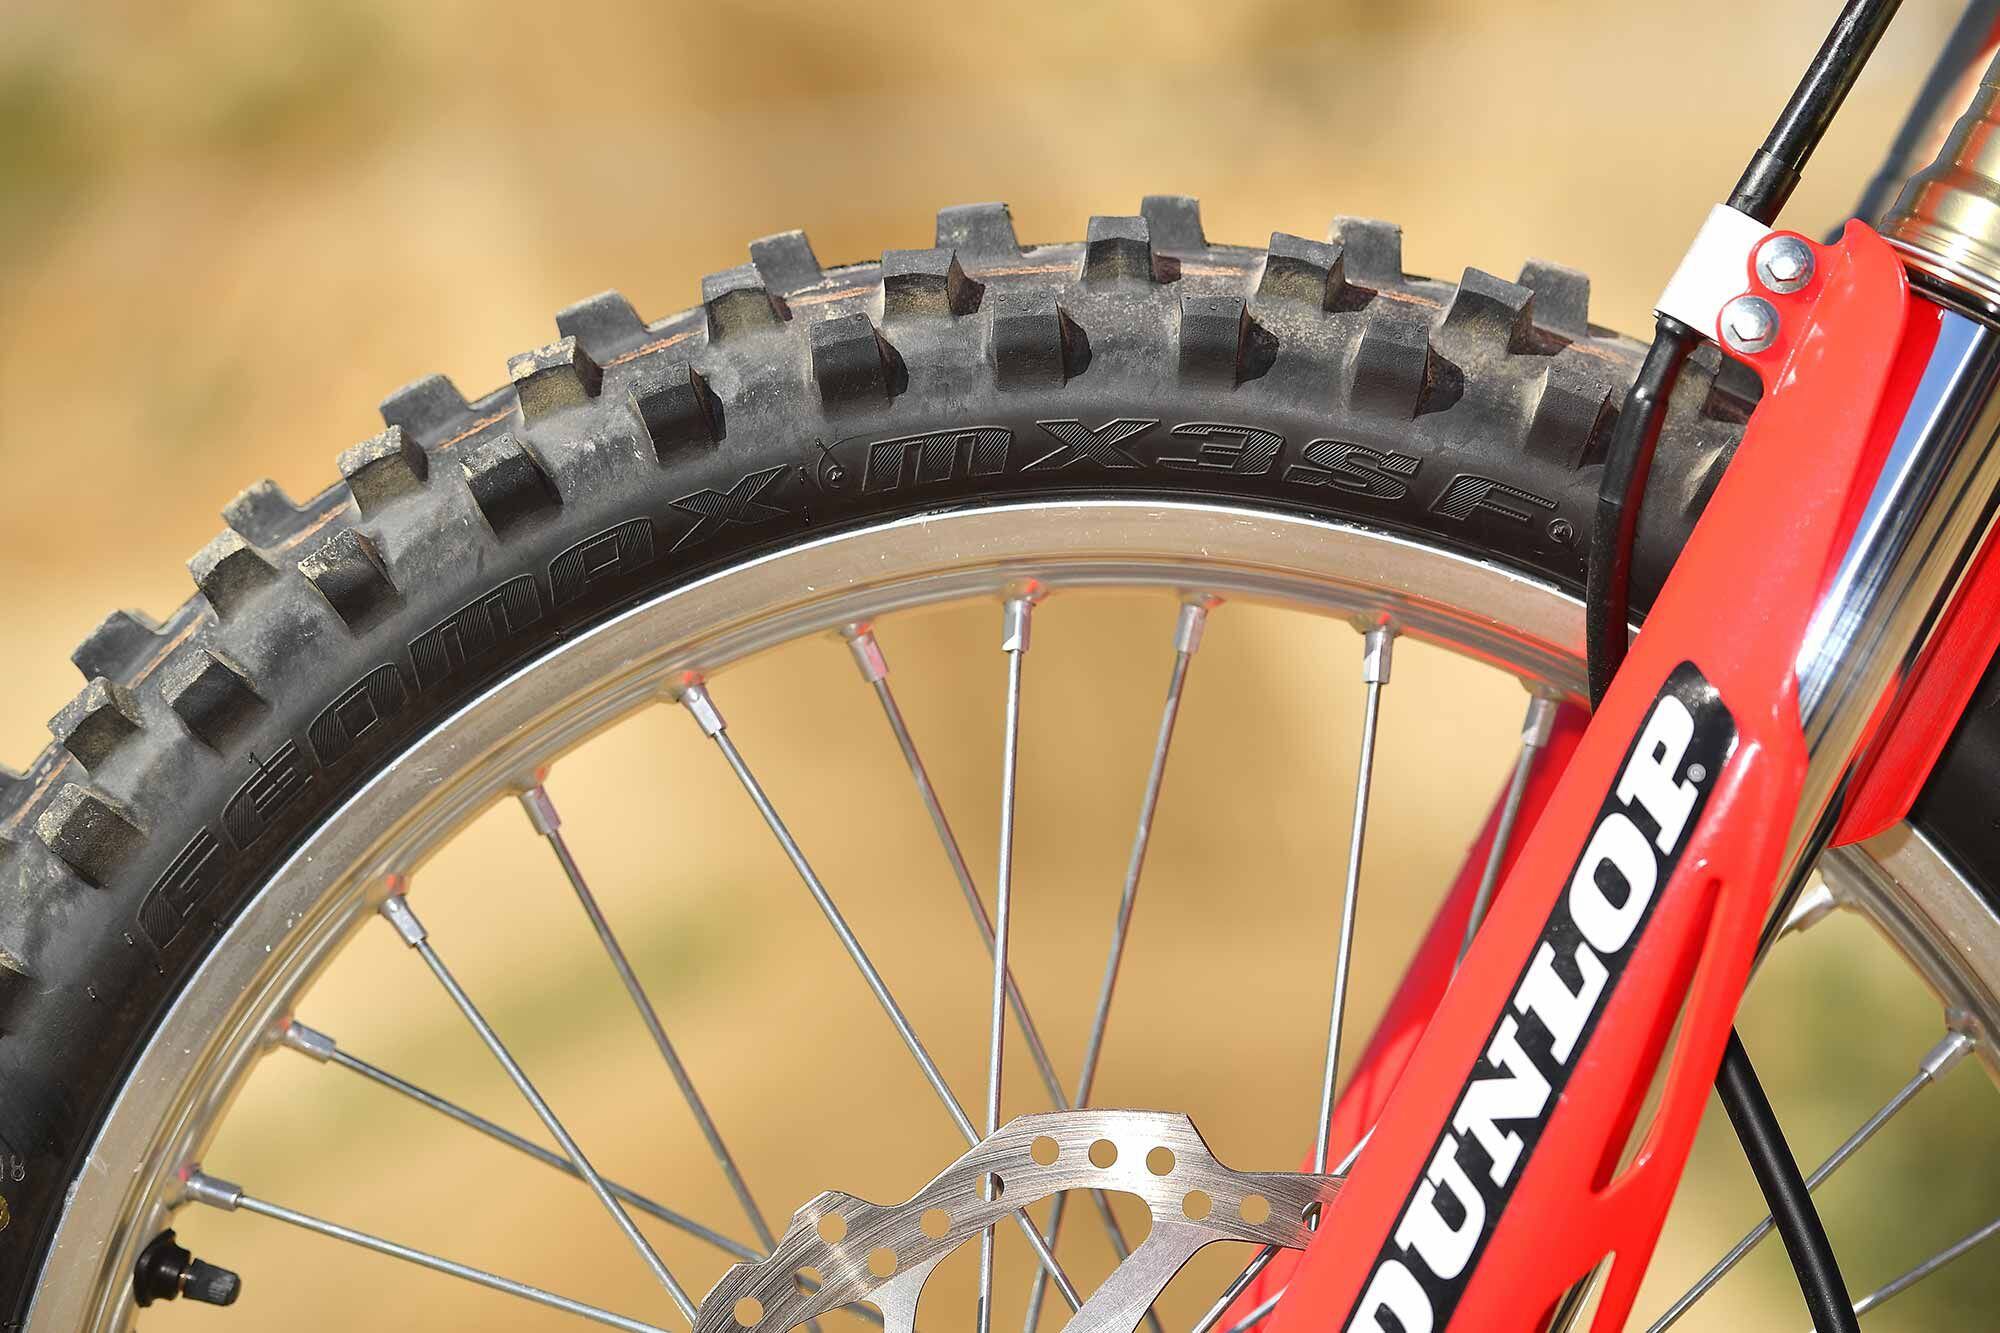 Dunlop’s Geomax MX3S is a great choice of front tire, especially for the CRF450R.